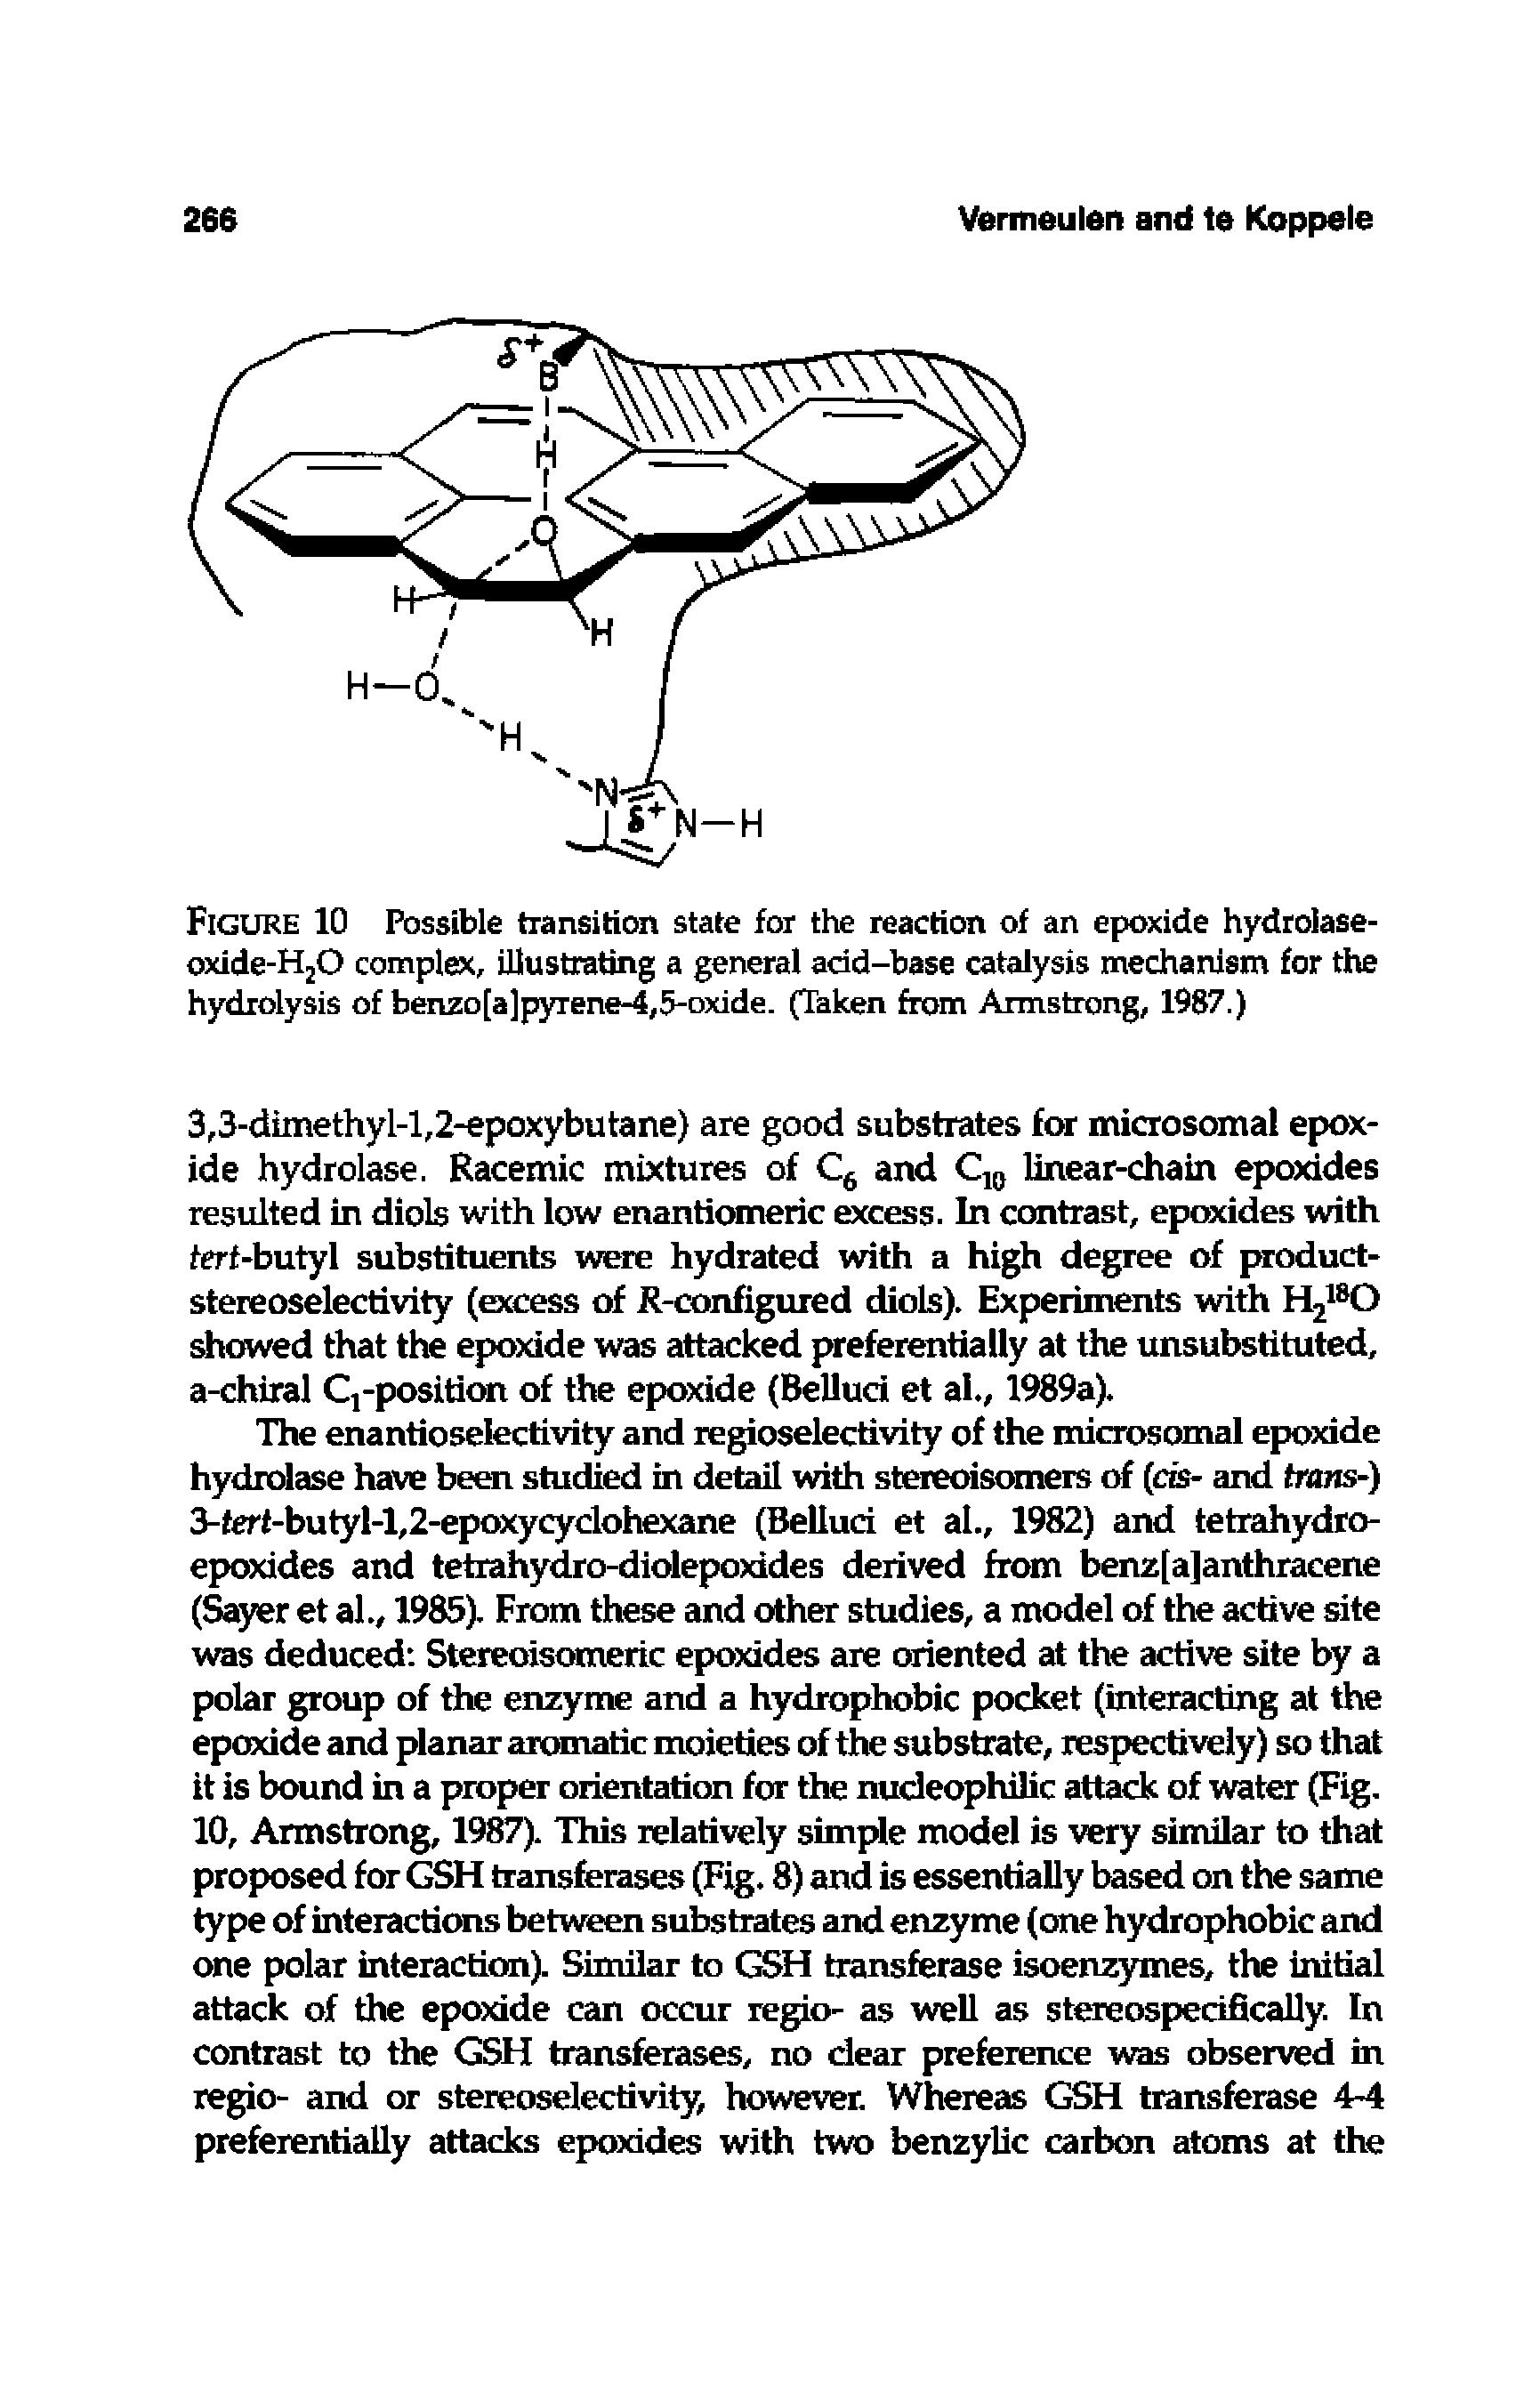 Figure 10 Possible transition state for the reaction of an epoxide hydroiase-oxide-HjO complex, illustrating a general add-base catalysis mechanism for the hydrolysis of benzo[a]pyrene-4,5-oxide. (Taken from Armstrong, 1987.)...